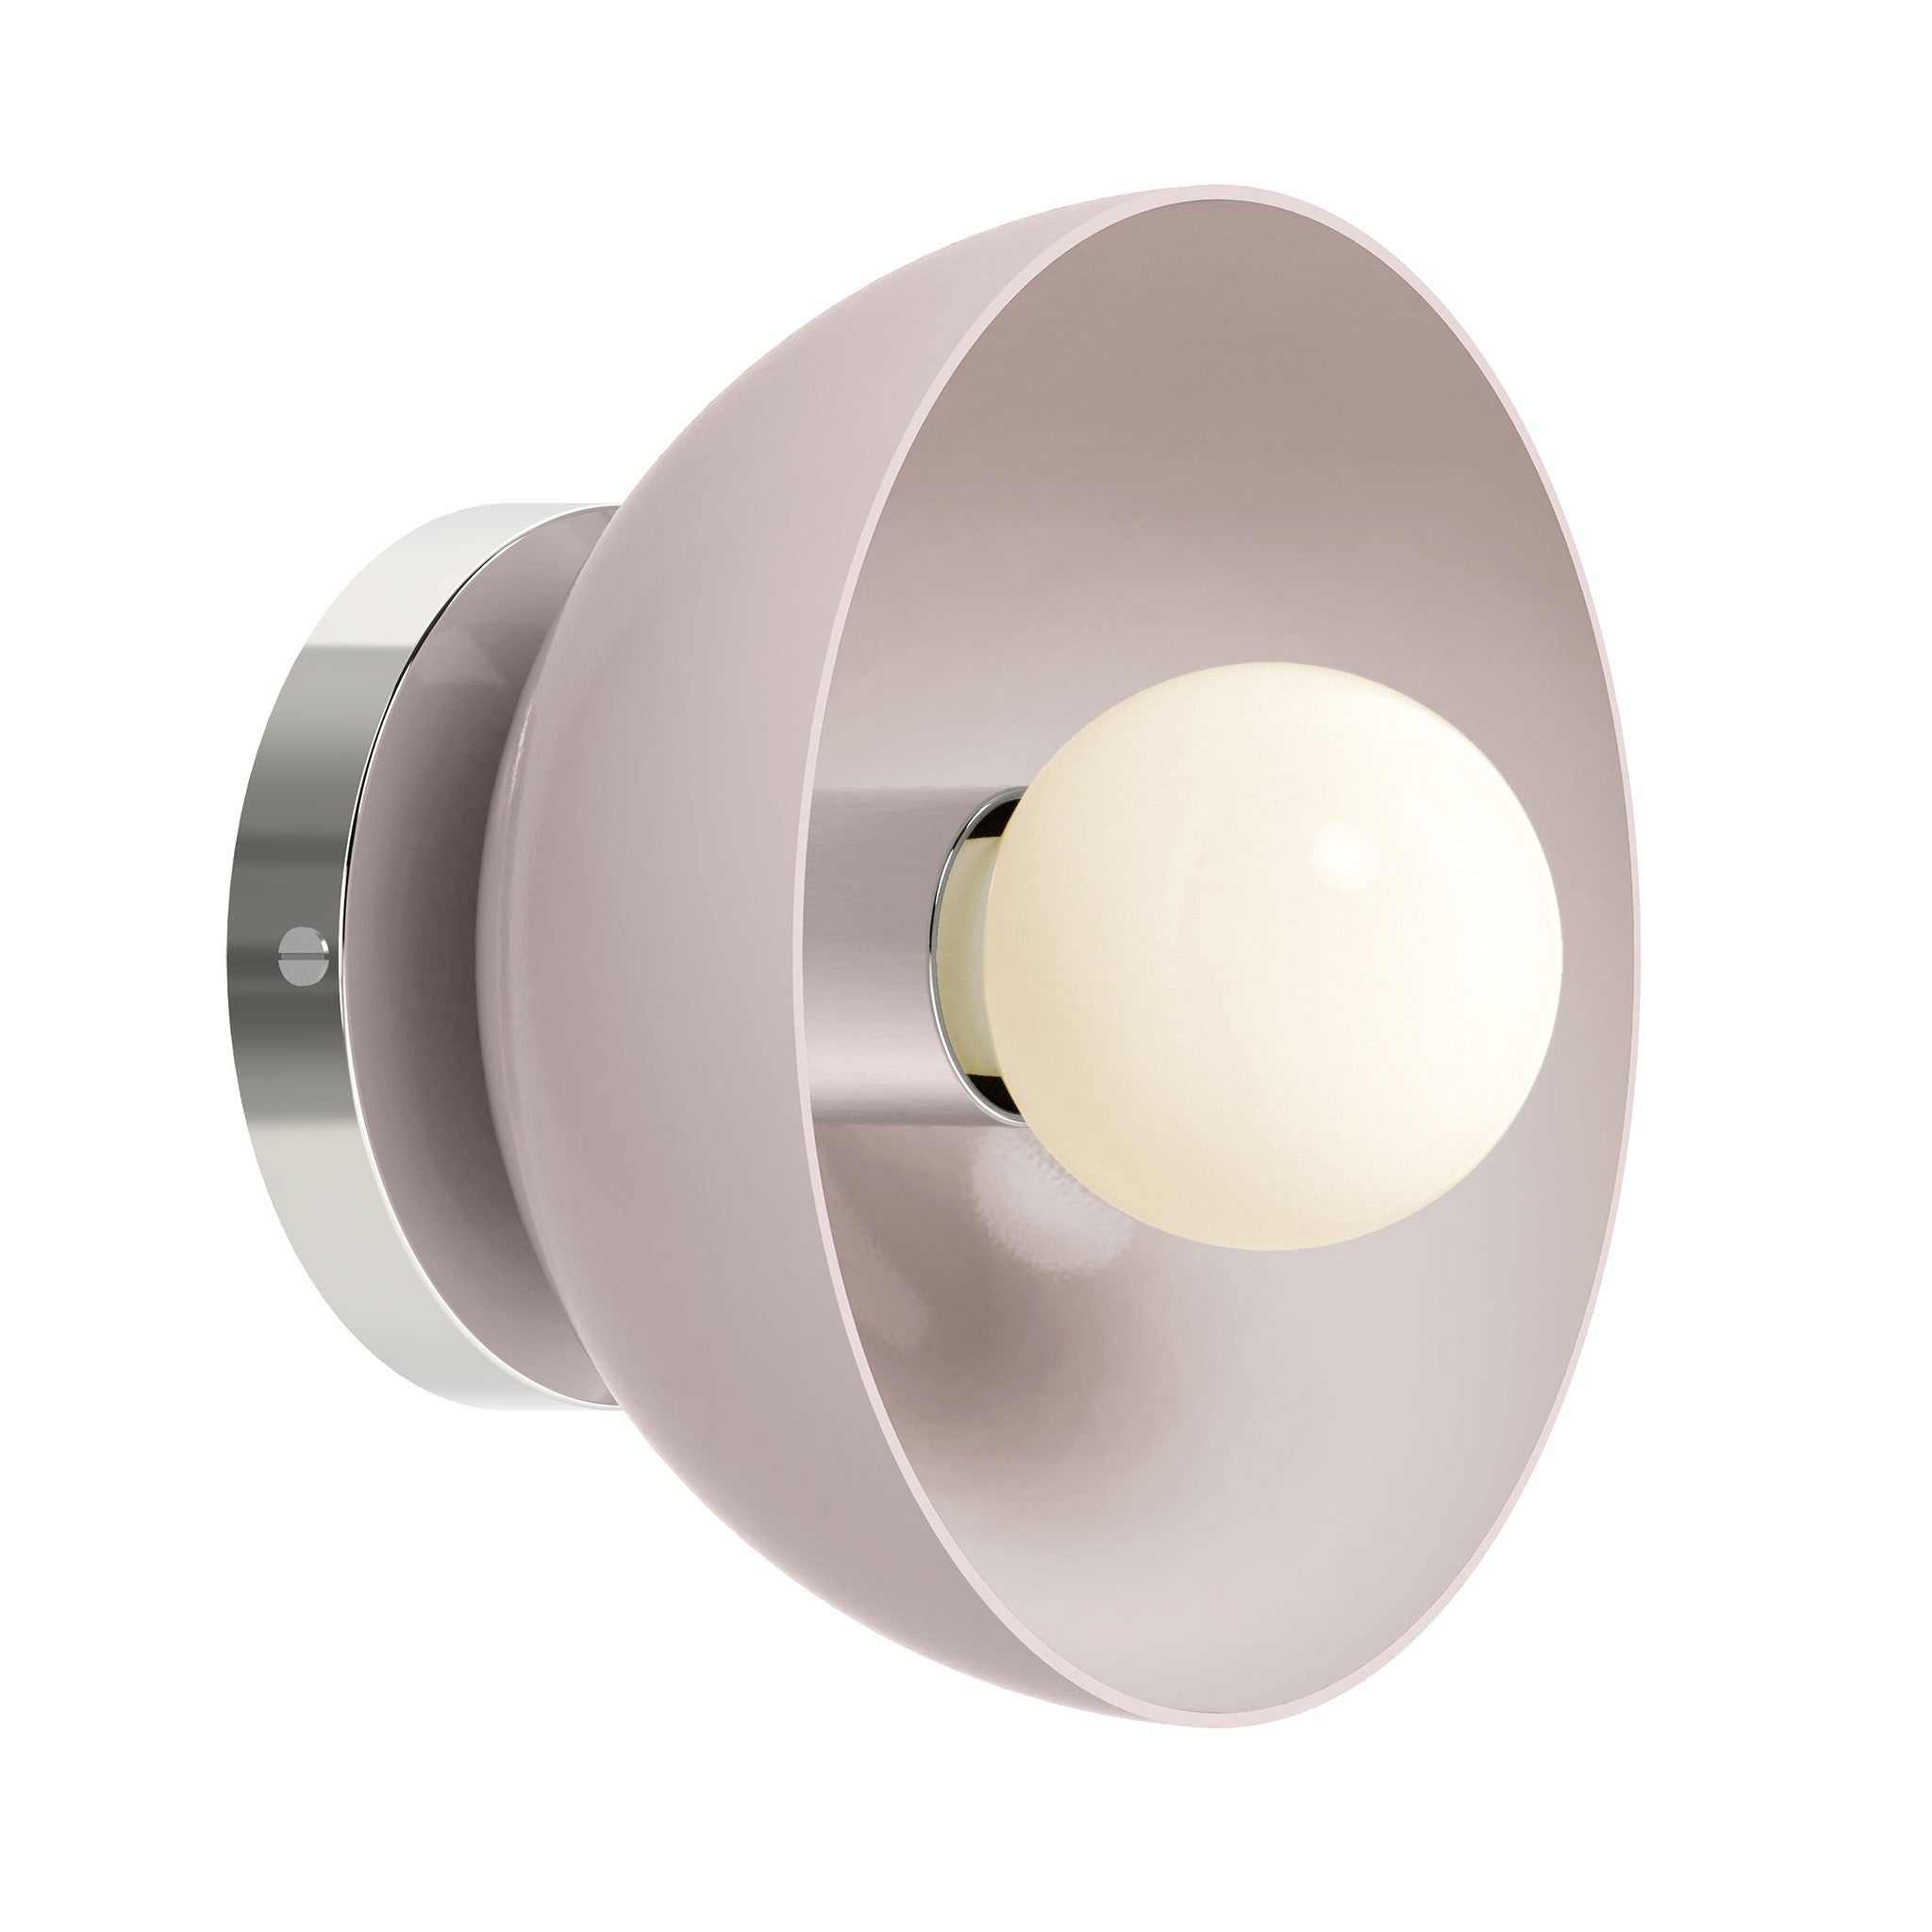 Nickel and barely color Hemi sconce 8" Dutton Brown lighting